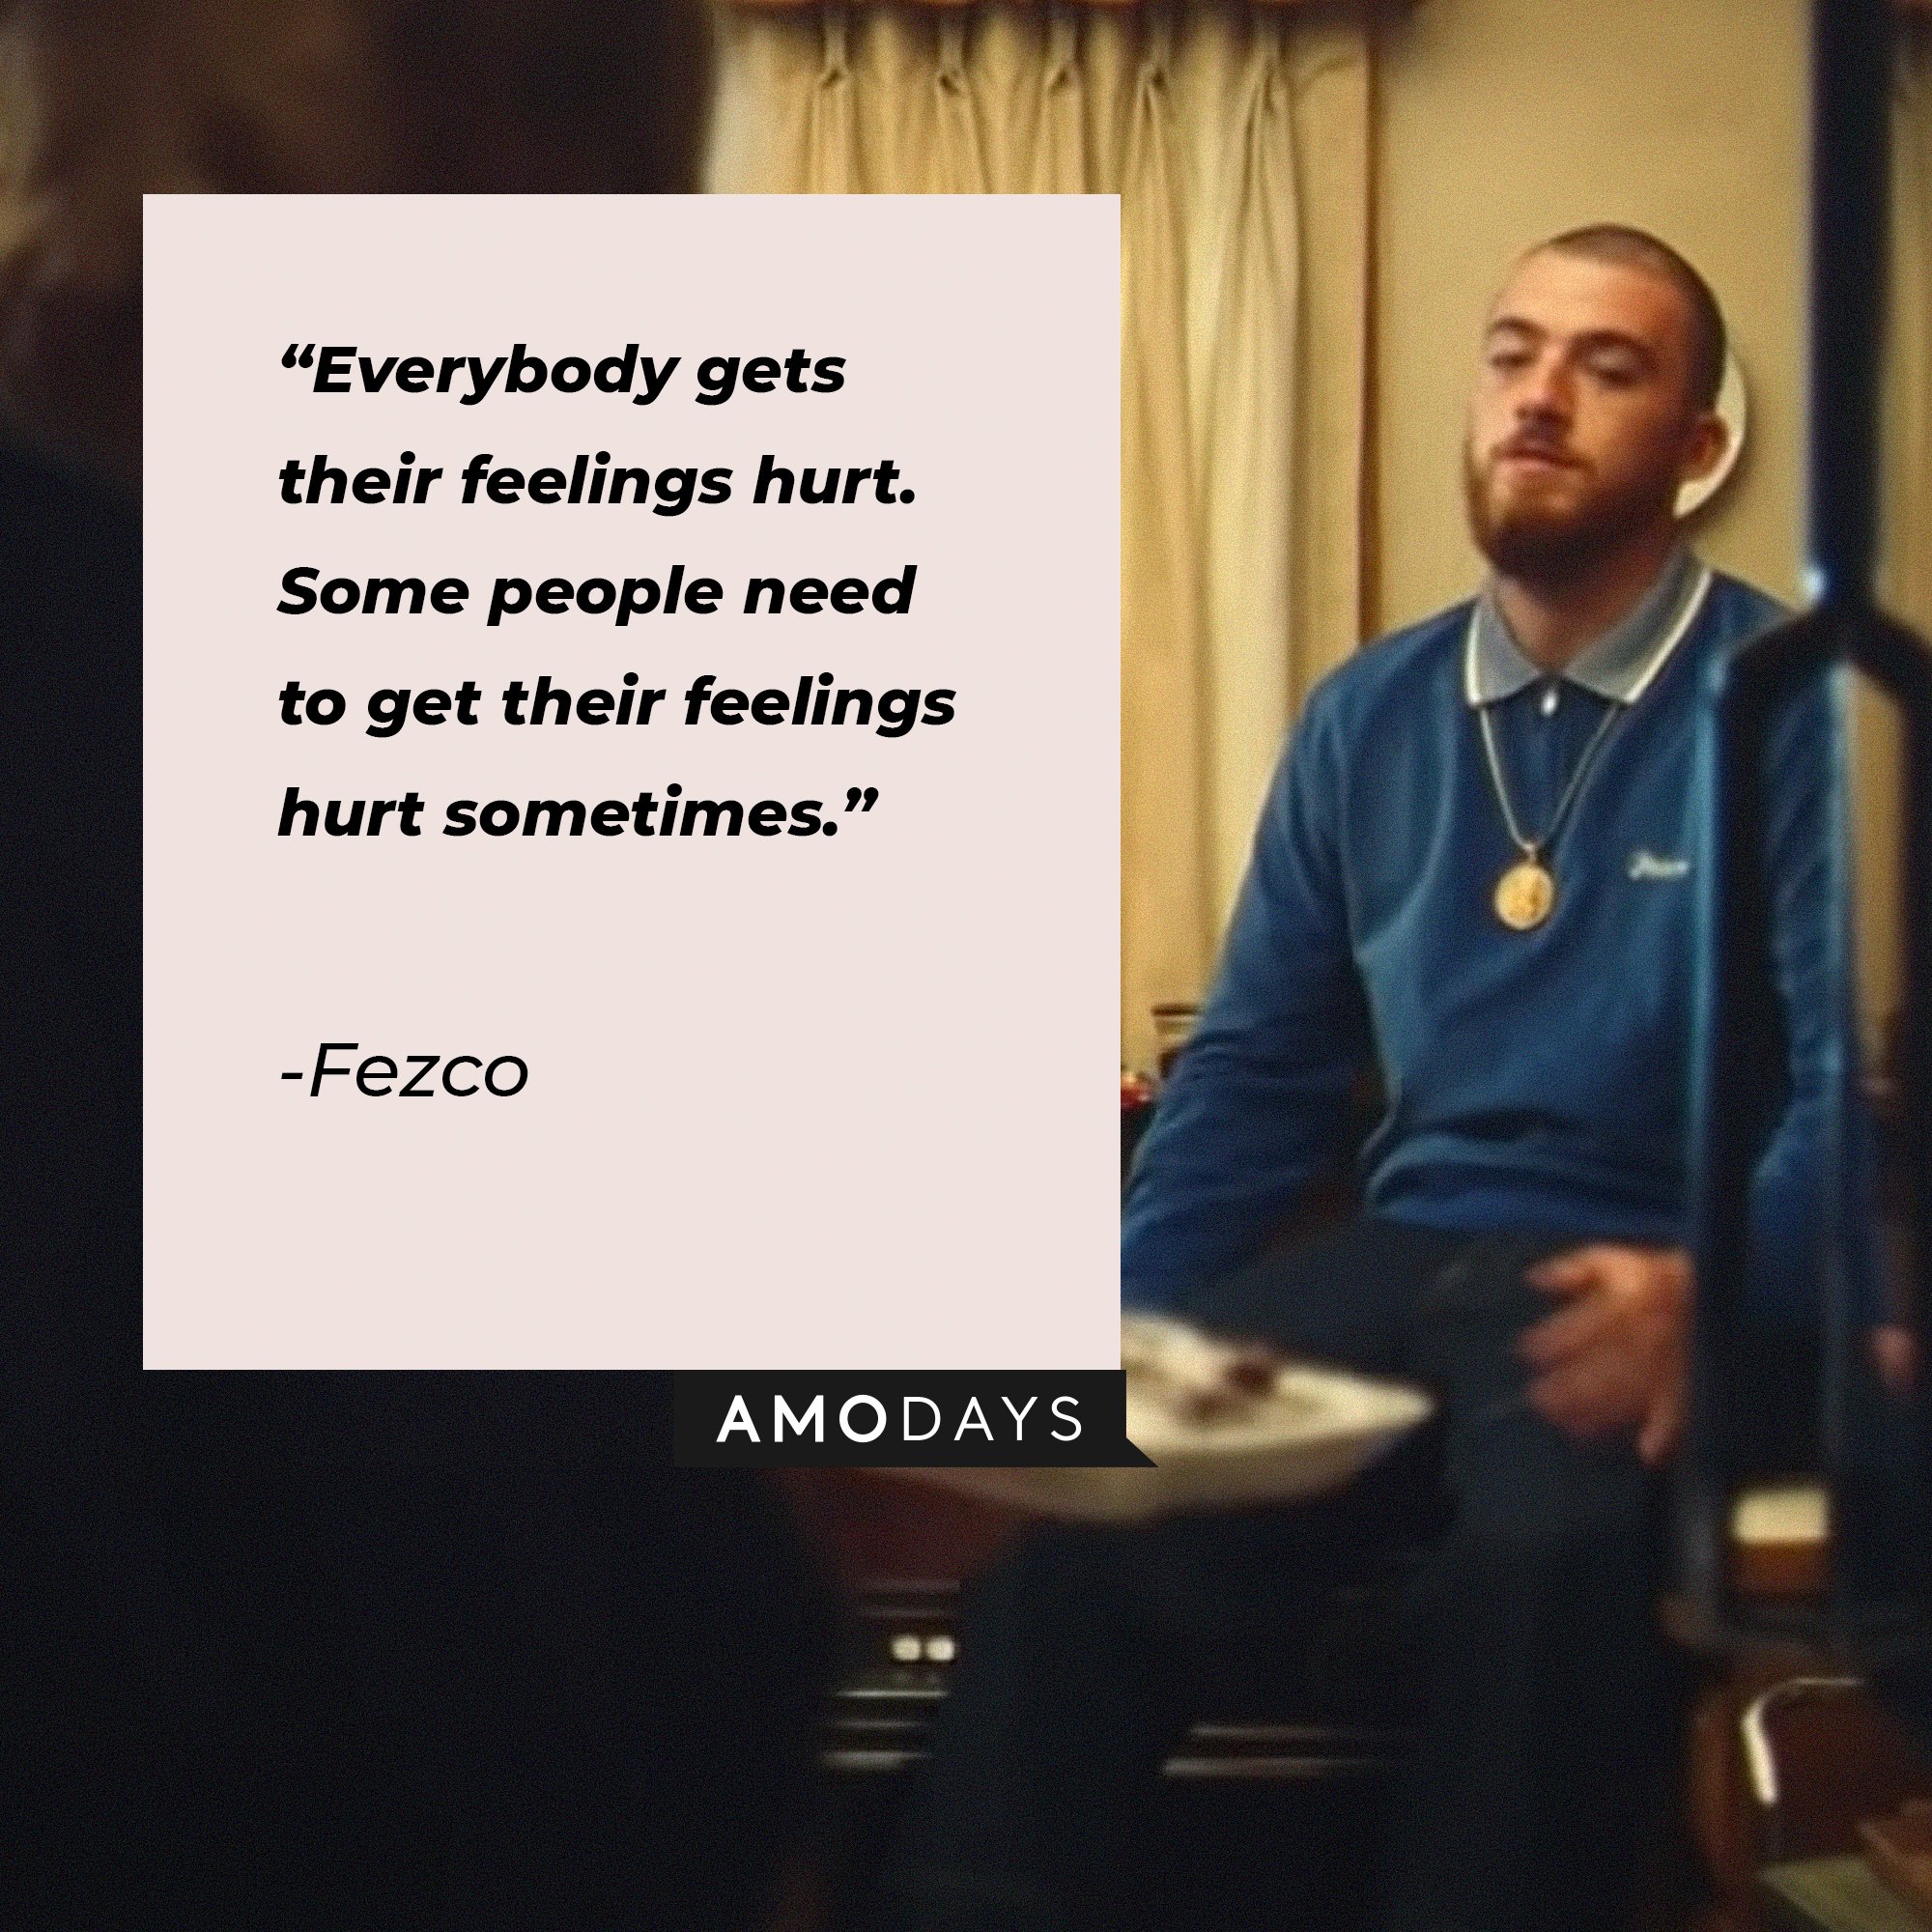 Fezco’s quote: “Everybody gets their feelings hurt. Some people need to get their feelings hurt sometimes.” | Image: AmoDays